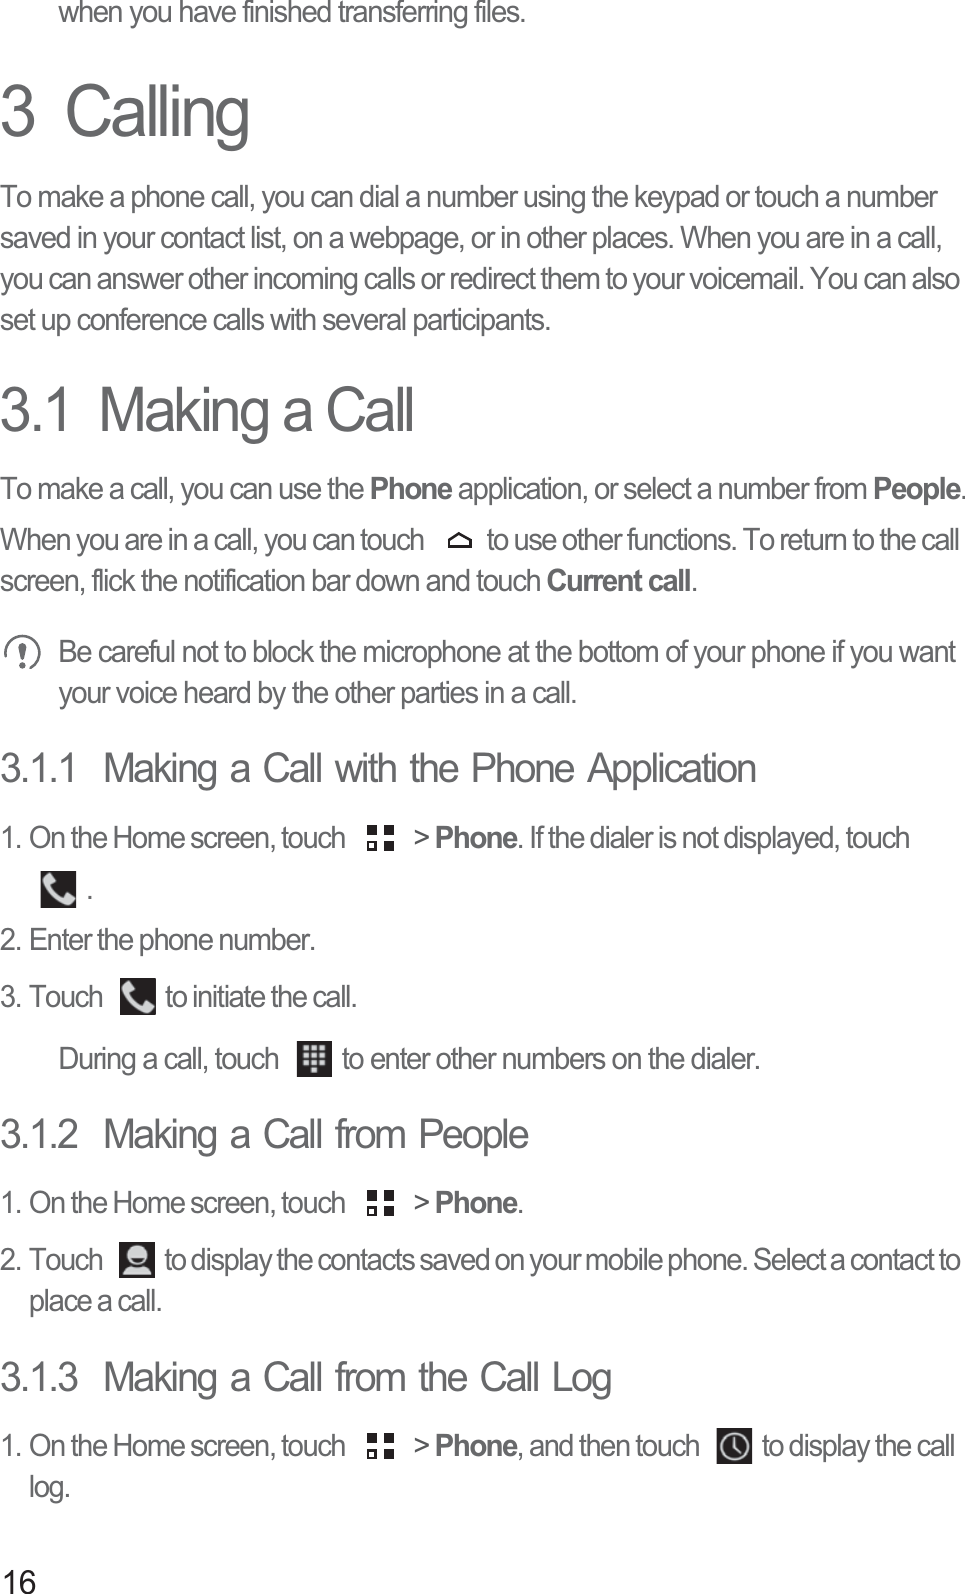 16when you have finished transferring files.3  CallingTo make a phone call, you can dial a number using the keypad or touch a number saved in your contact list, on a webpage, or in other places. When you are in a call, you can answer other incoming calls or redirect them to your voicemail. You can also set up conference calls with several participants.3.1  Making a CallTo make a call, you can use the Phone application, or select a number from People.When you are in a call, you can touch  to use other functions. To return to the call screen, flick the notification bar down and touch Current call. Be careful not to block the microphone at the bottom of your phone if you want your voice heard by the other parties in a call.3.1.1  Making a Call with the Phone Application1. On the Home screen, touch   &gt; Phone. If the dialer is not displayed, touch . 2. Enter the phone number. 3. Touch  to initiate the call.During a call, touch  to enter other numbers on the dialer.3.1.2  Making a Call from People1. On the Home screen, touch   &gt; Phone. 2. Touch  to display the contacts saved on your mobile phone. Select a contact to place a call.3.1.3  Making a Call from the Call Log1. On the Home screen, touch   &gt; Phone, and then touch  to display the call log. 